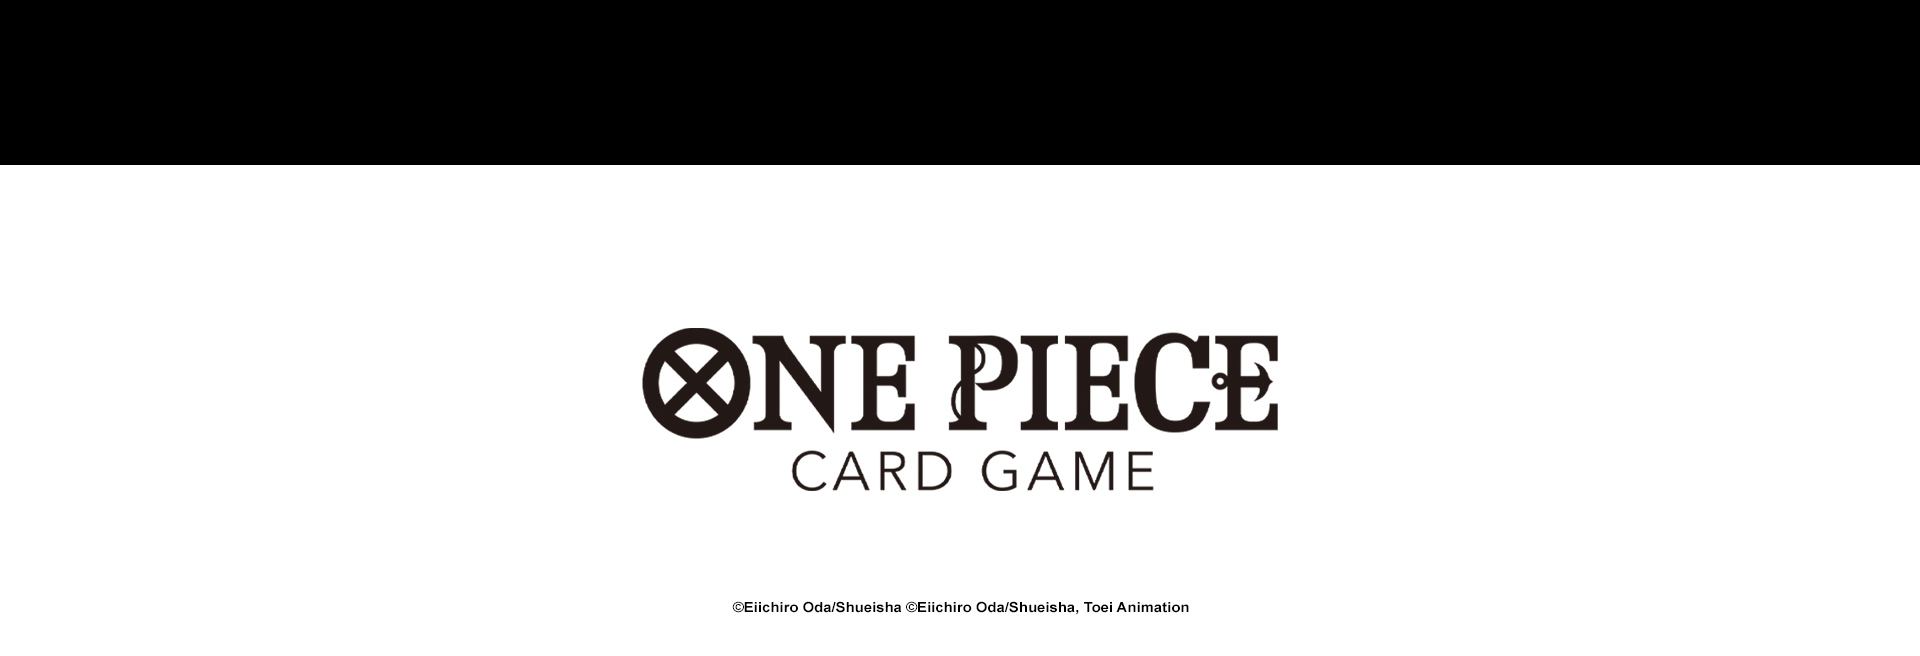 One piece card game logo on white background 